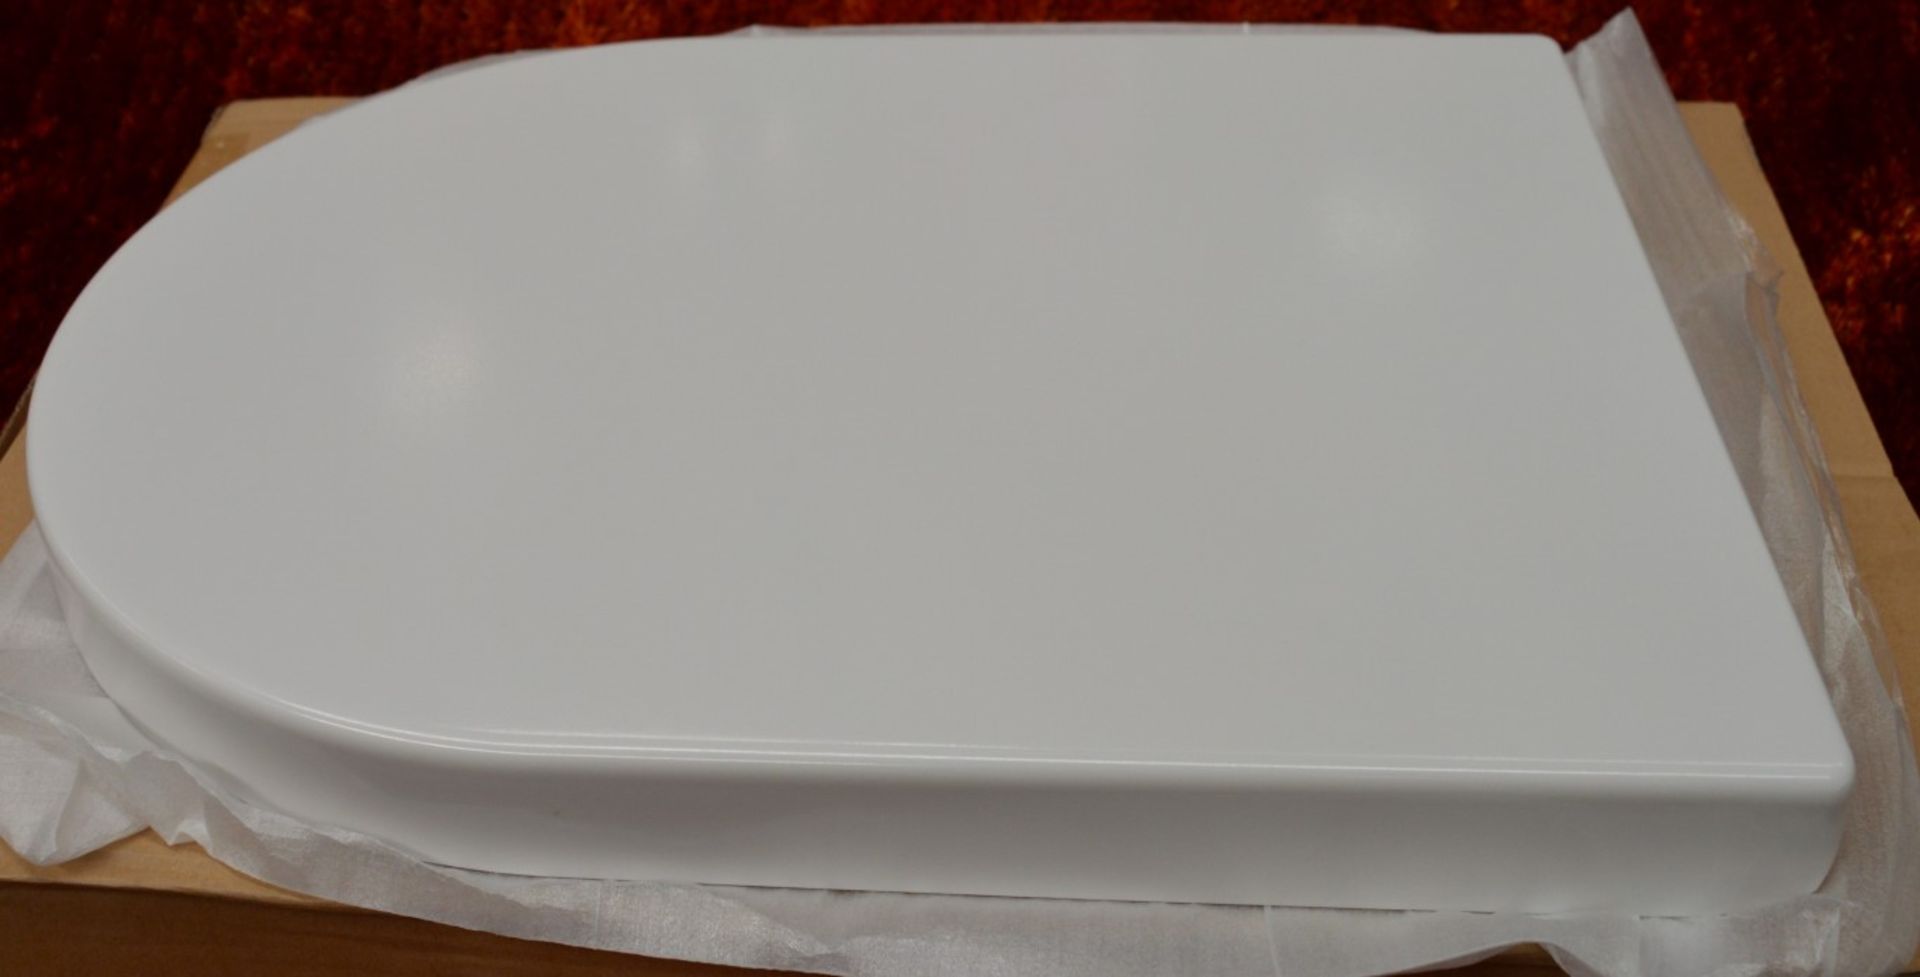 1 x Vogue Cosmos Modern White Soft Close Toilet Seat and Cover Top Fixing - Brand New Boxed - Image 2 of 6